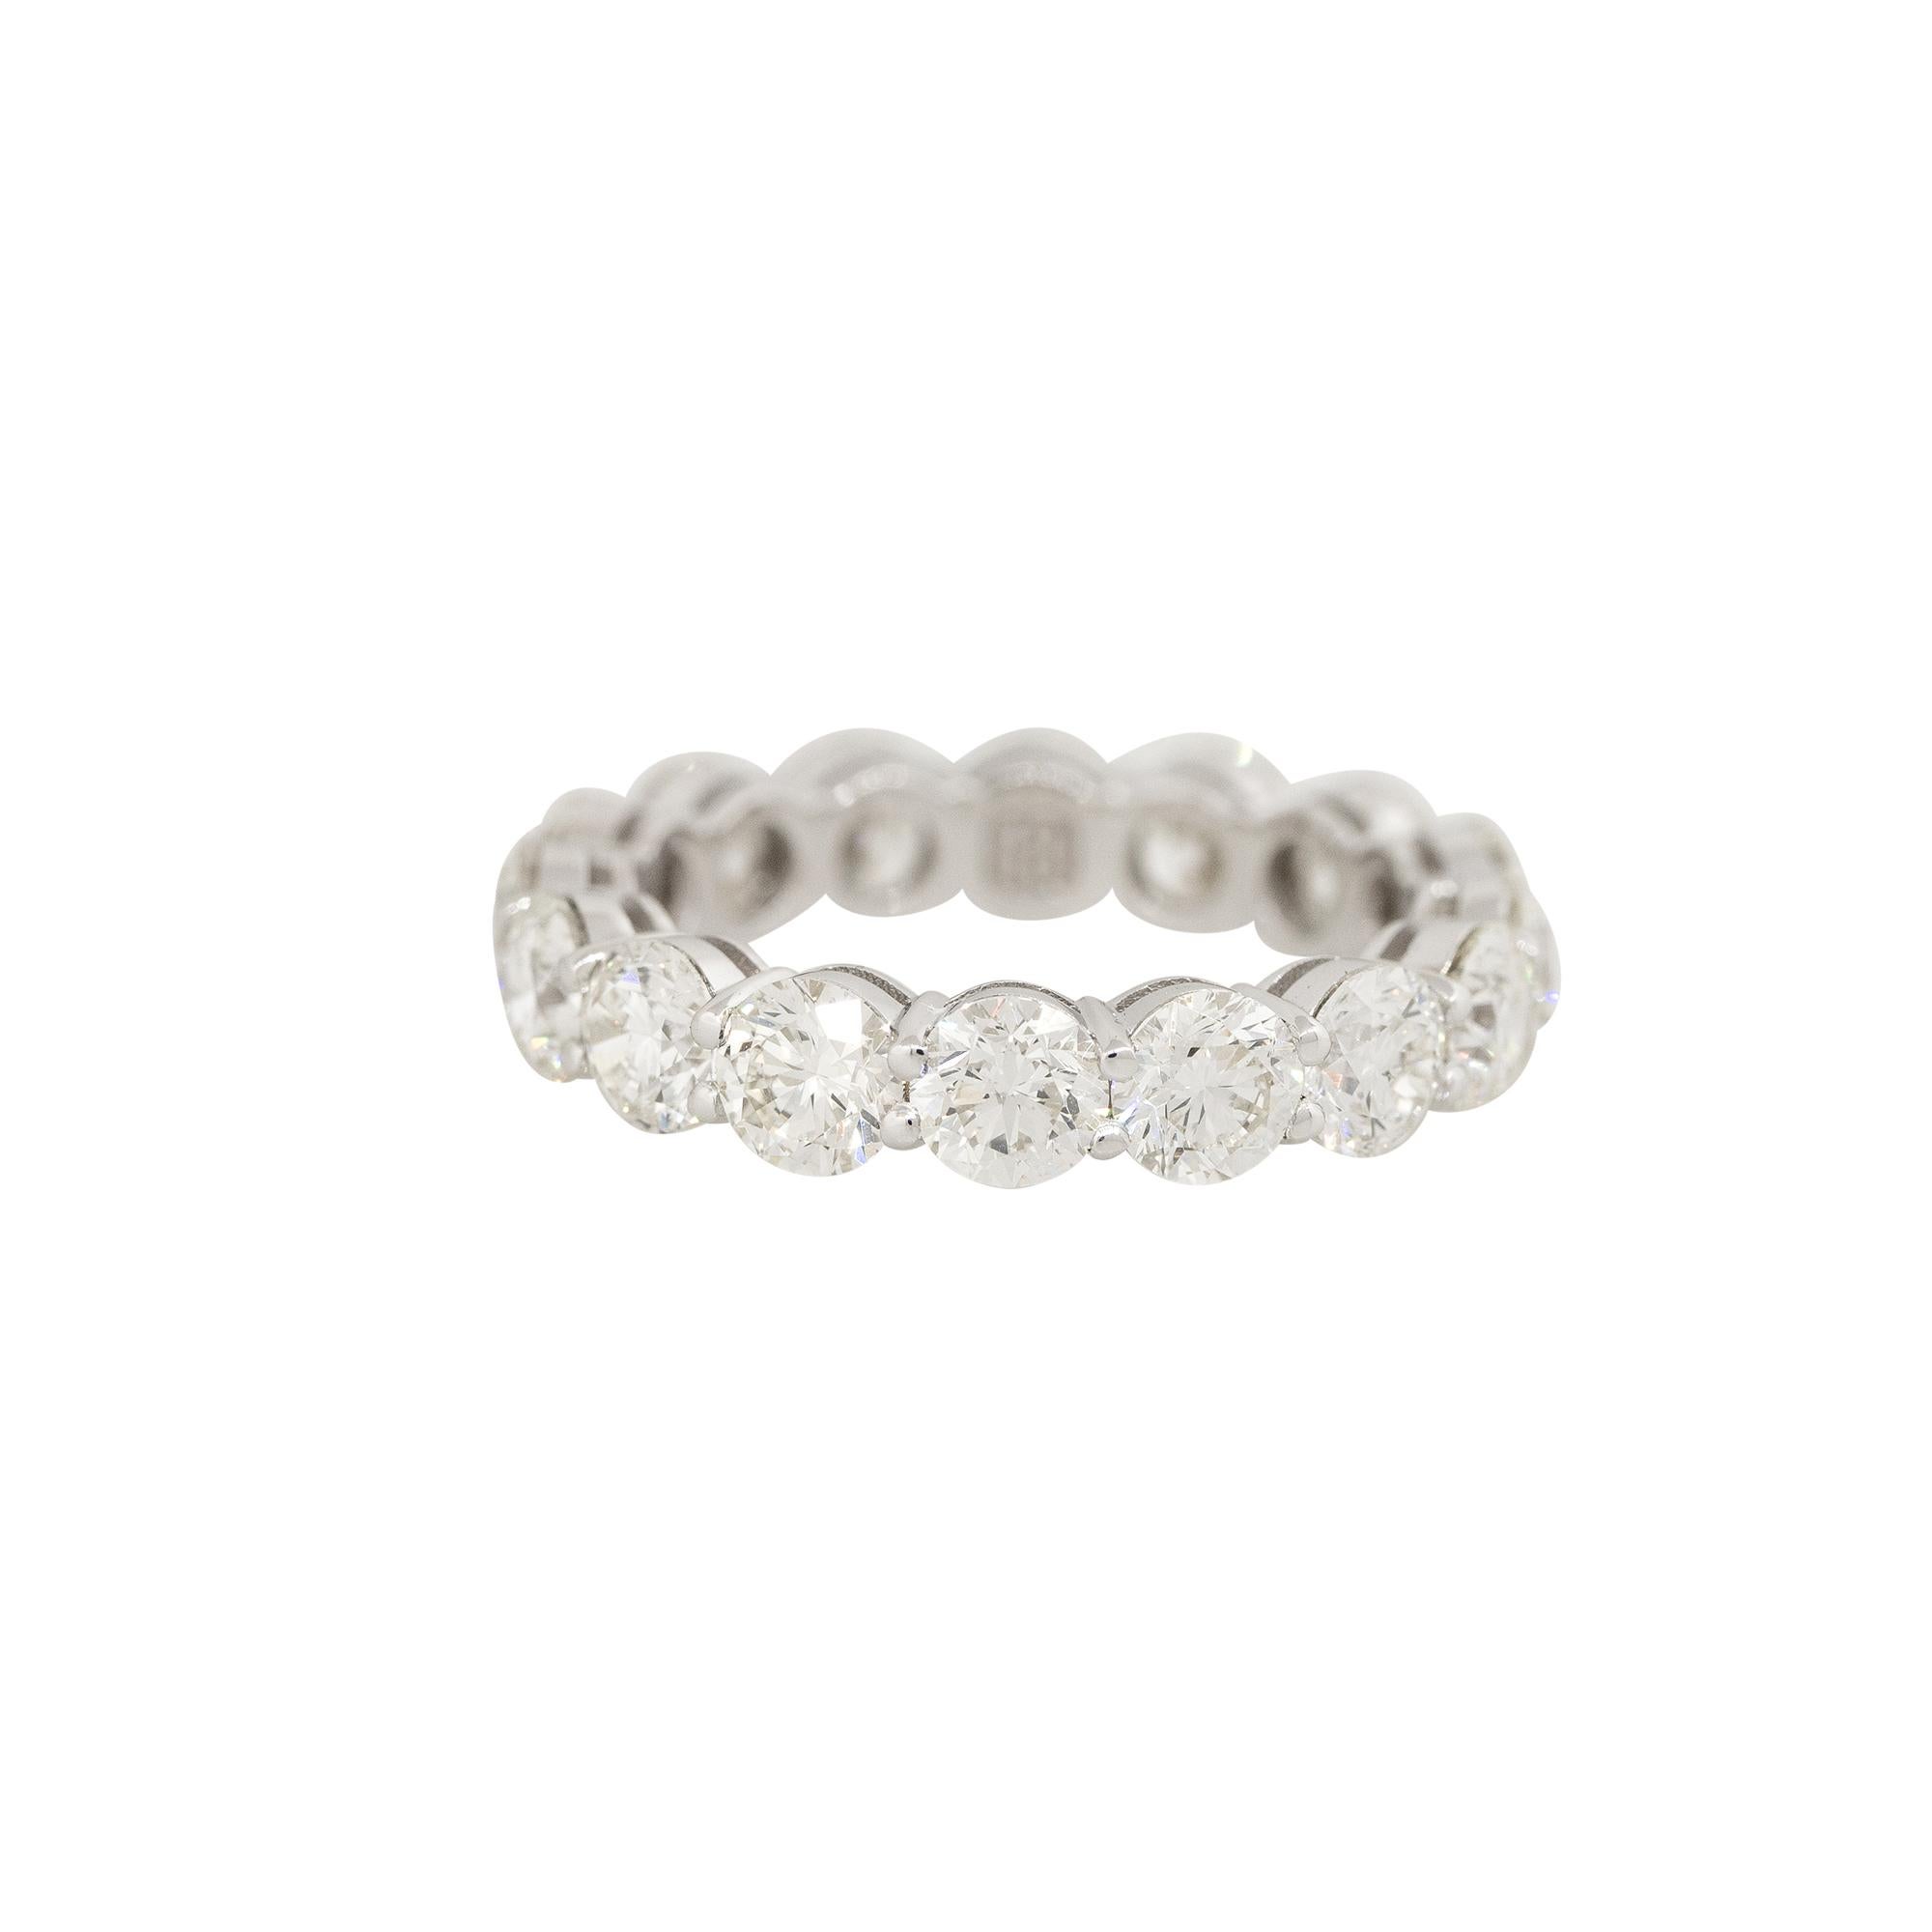 18 Karat White Gold 4.89 Carat Round Brilliant Diamond Eternity Band
Style: Women's Diamond Eternity Band
Material: 18 Karat White Gold
Main Diamond Details: There are approximately 4.89 carats of Round Brilliant Cut Diamonds. There are 16 stones